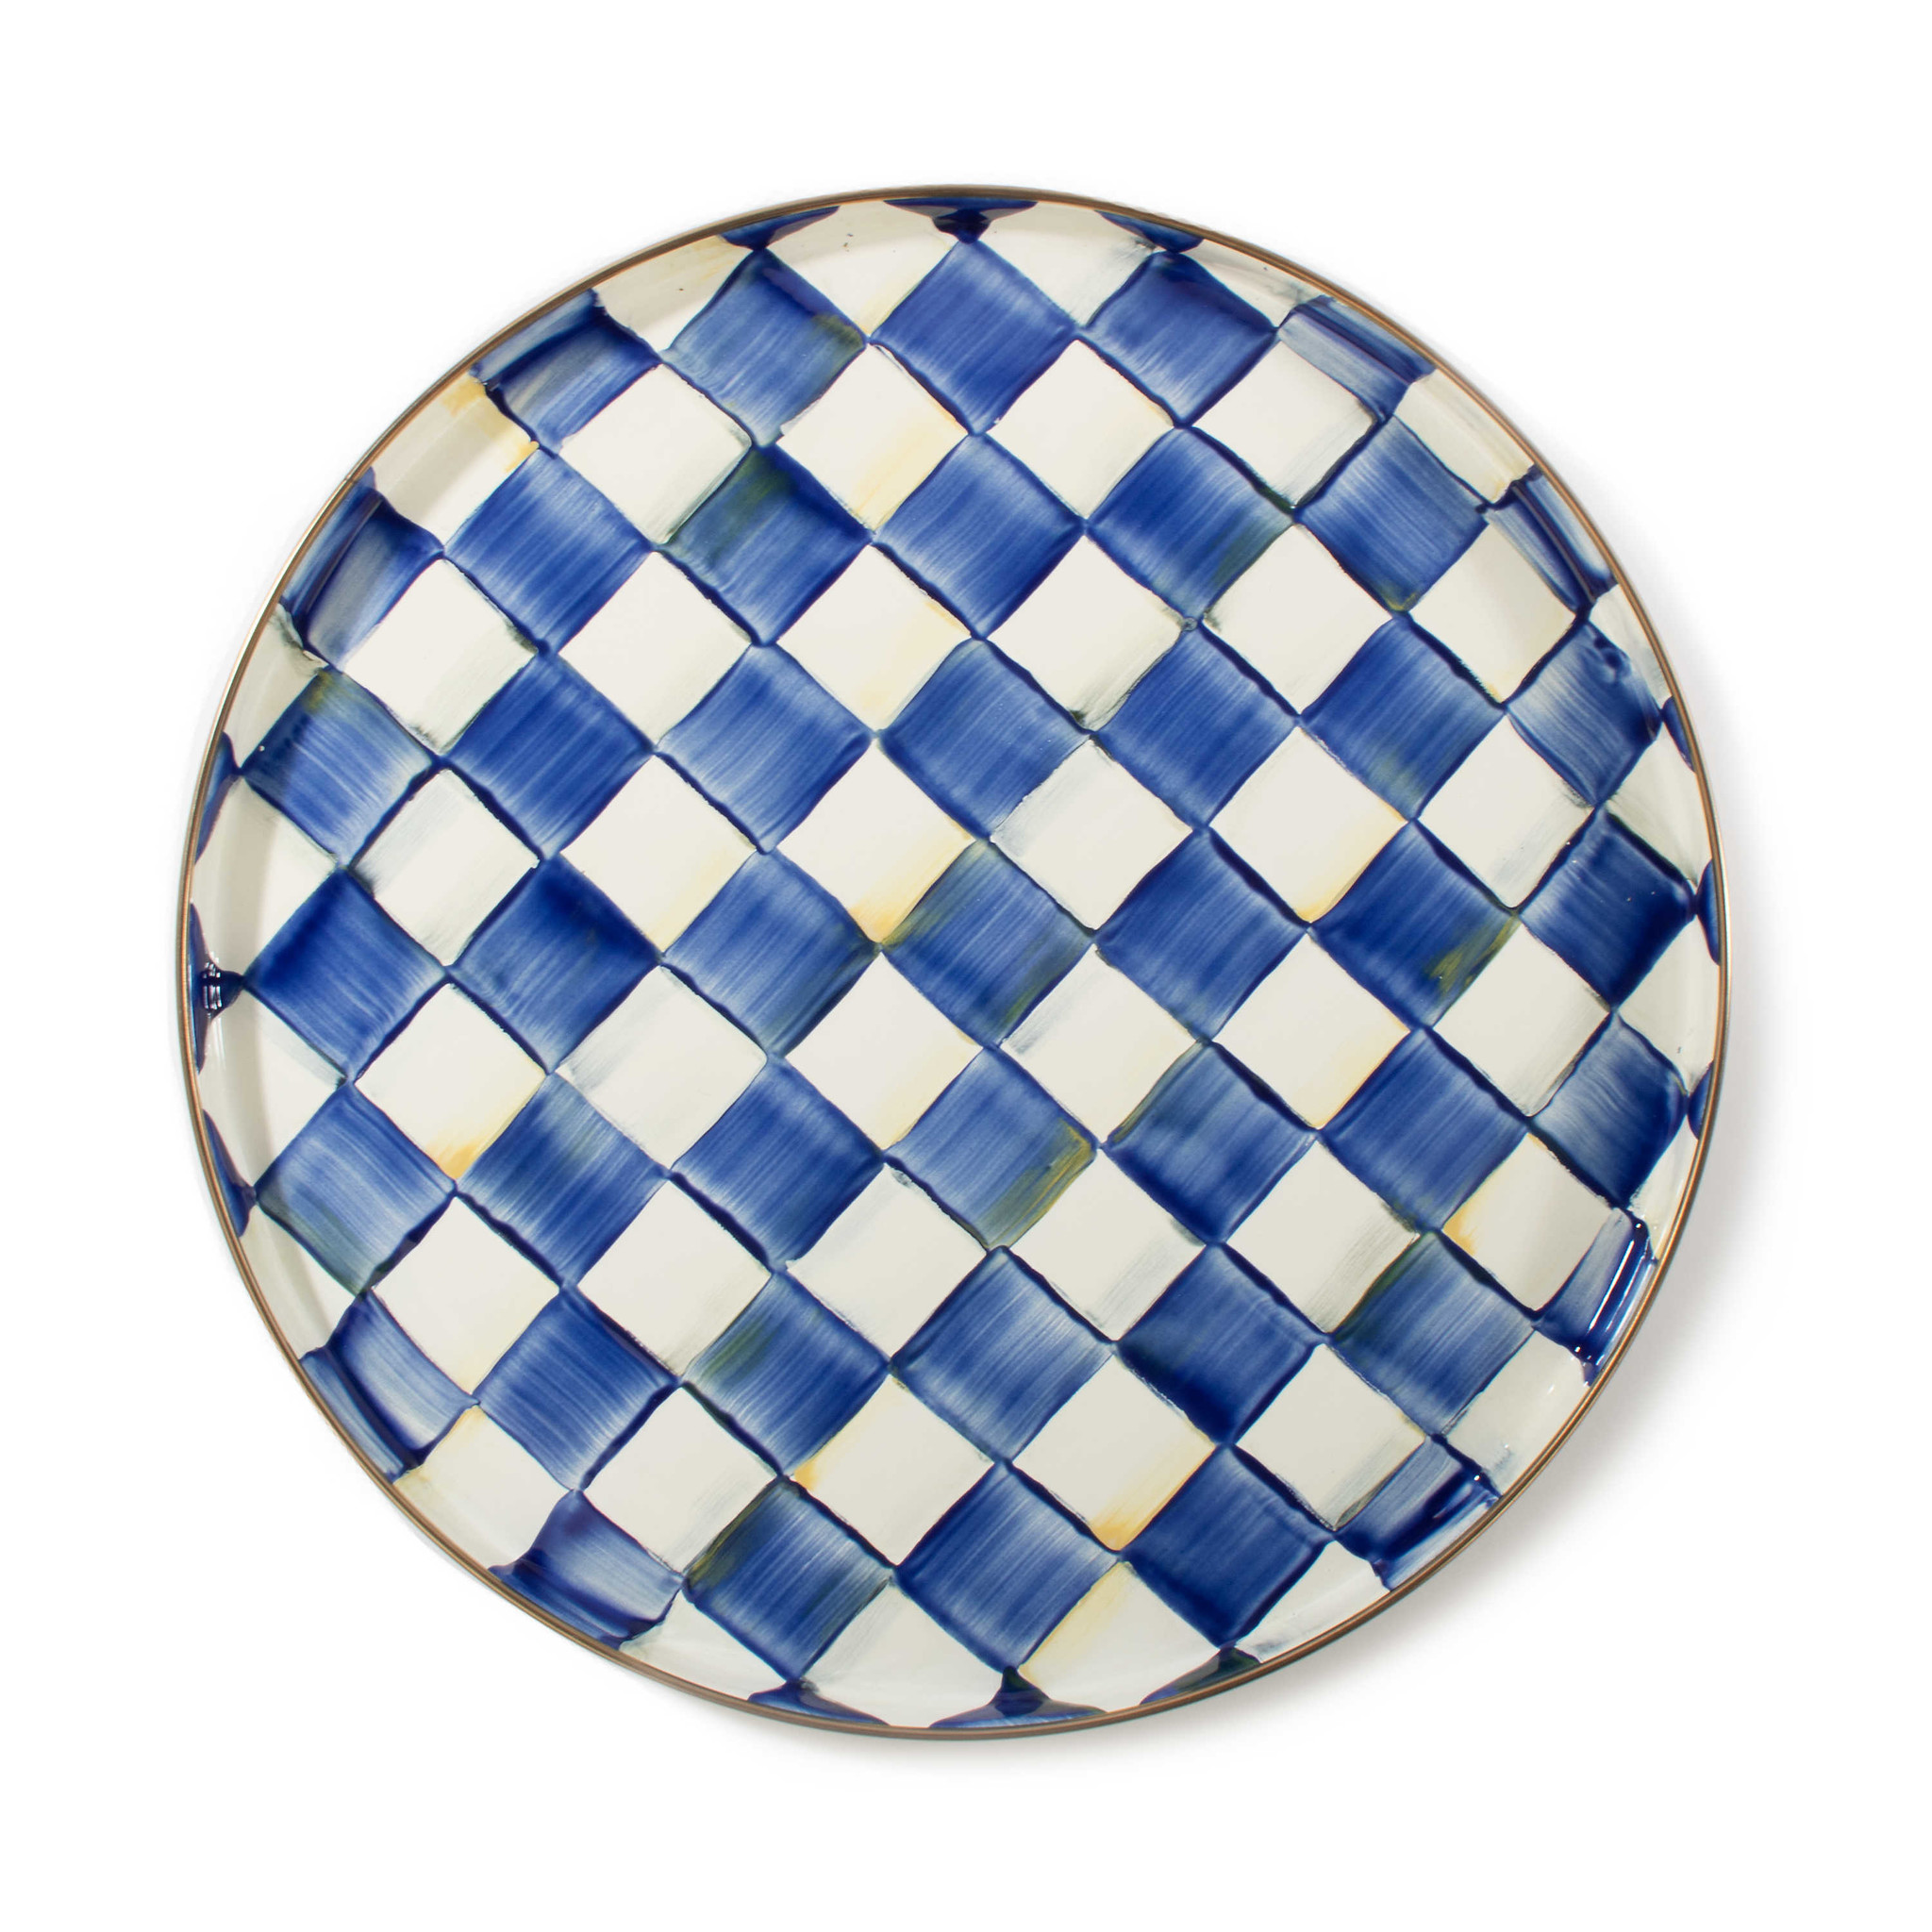 Courtly Check Rattan & Enamel Tray - Small - ivory & birch